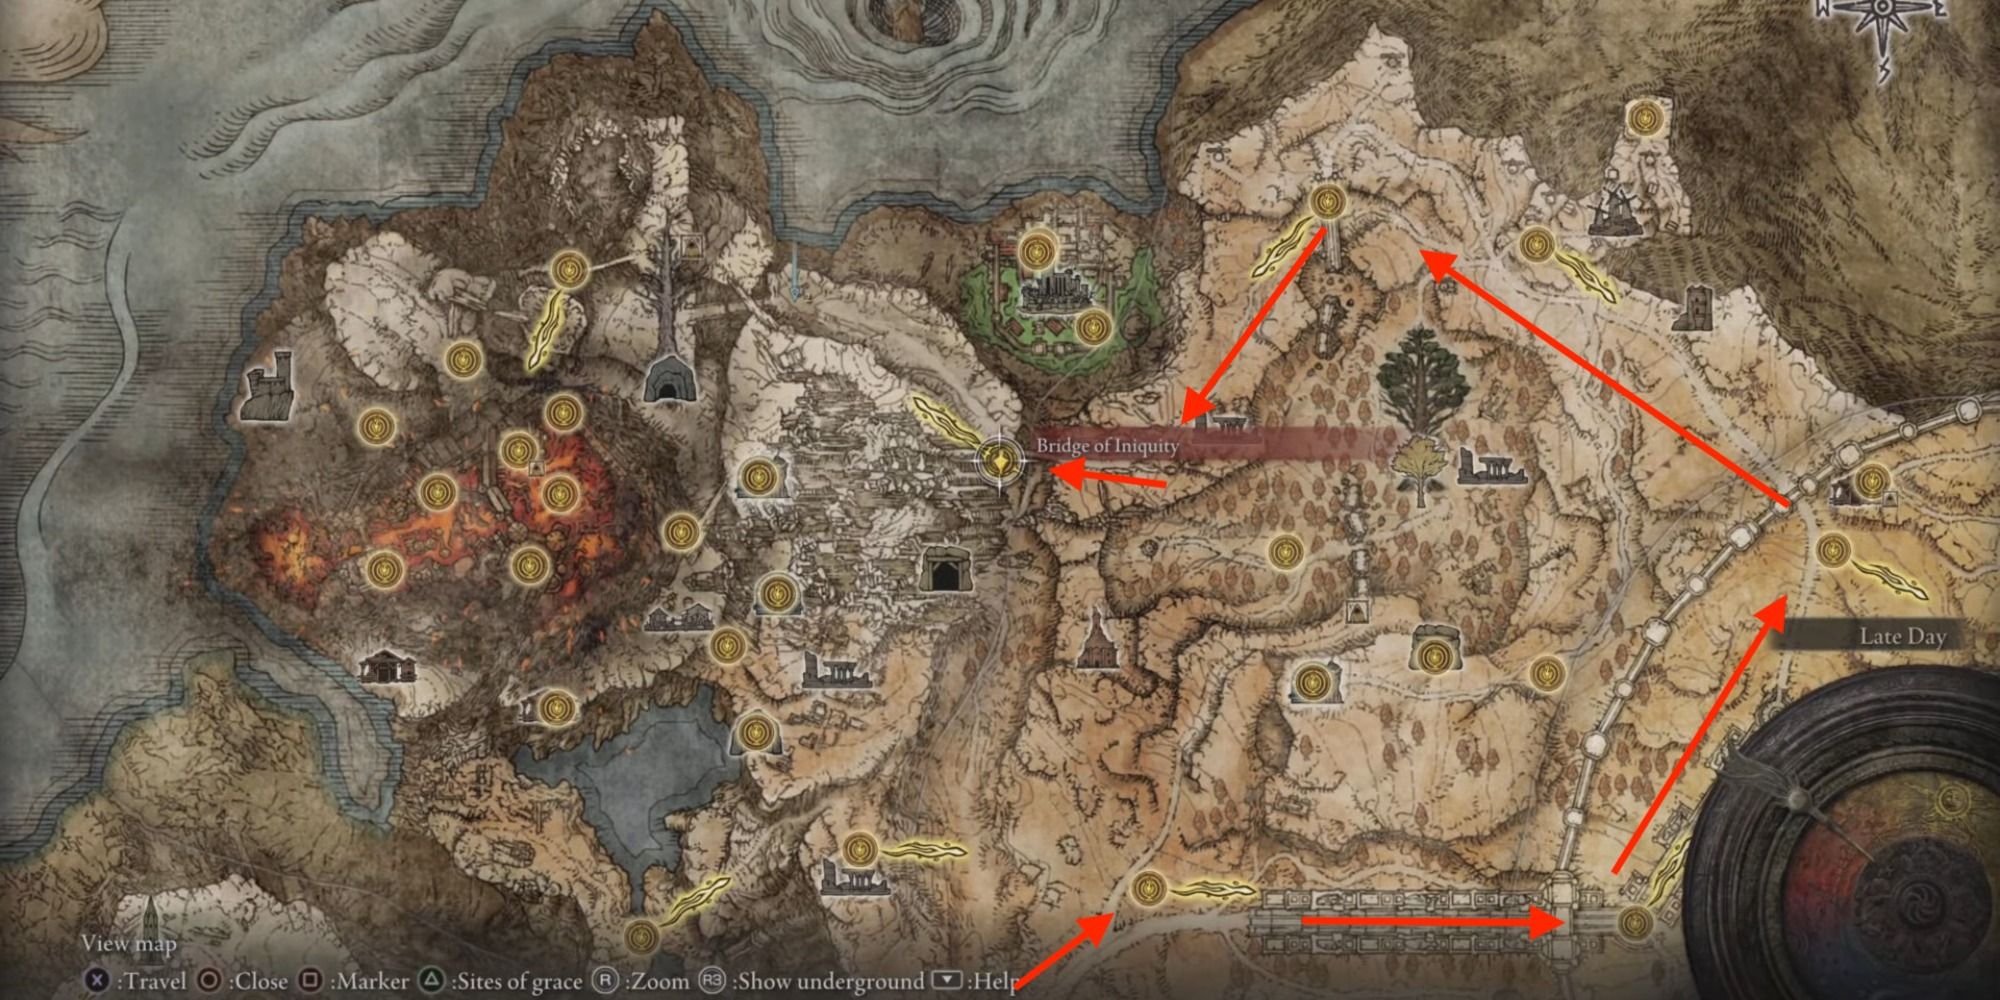 Bridge of Iniquity site of grace on the Elden Ring Map